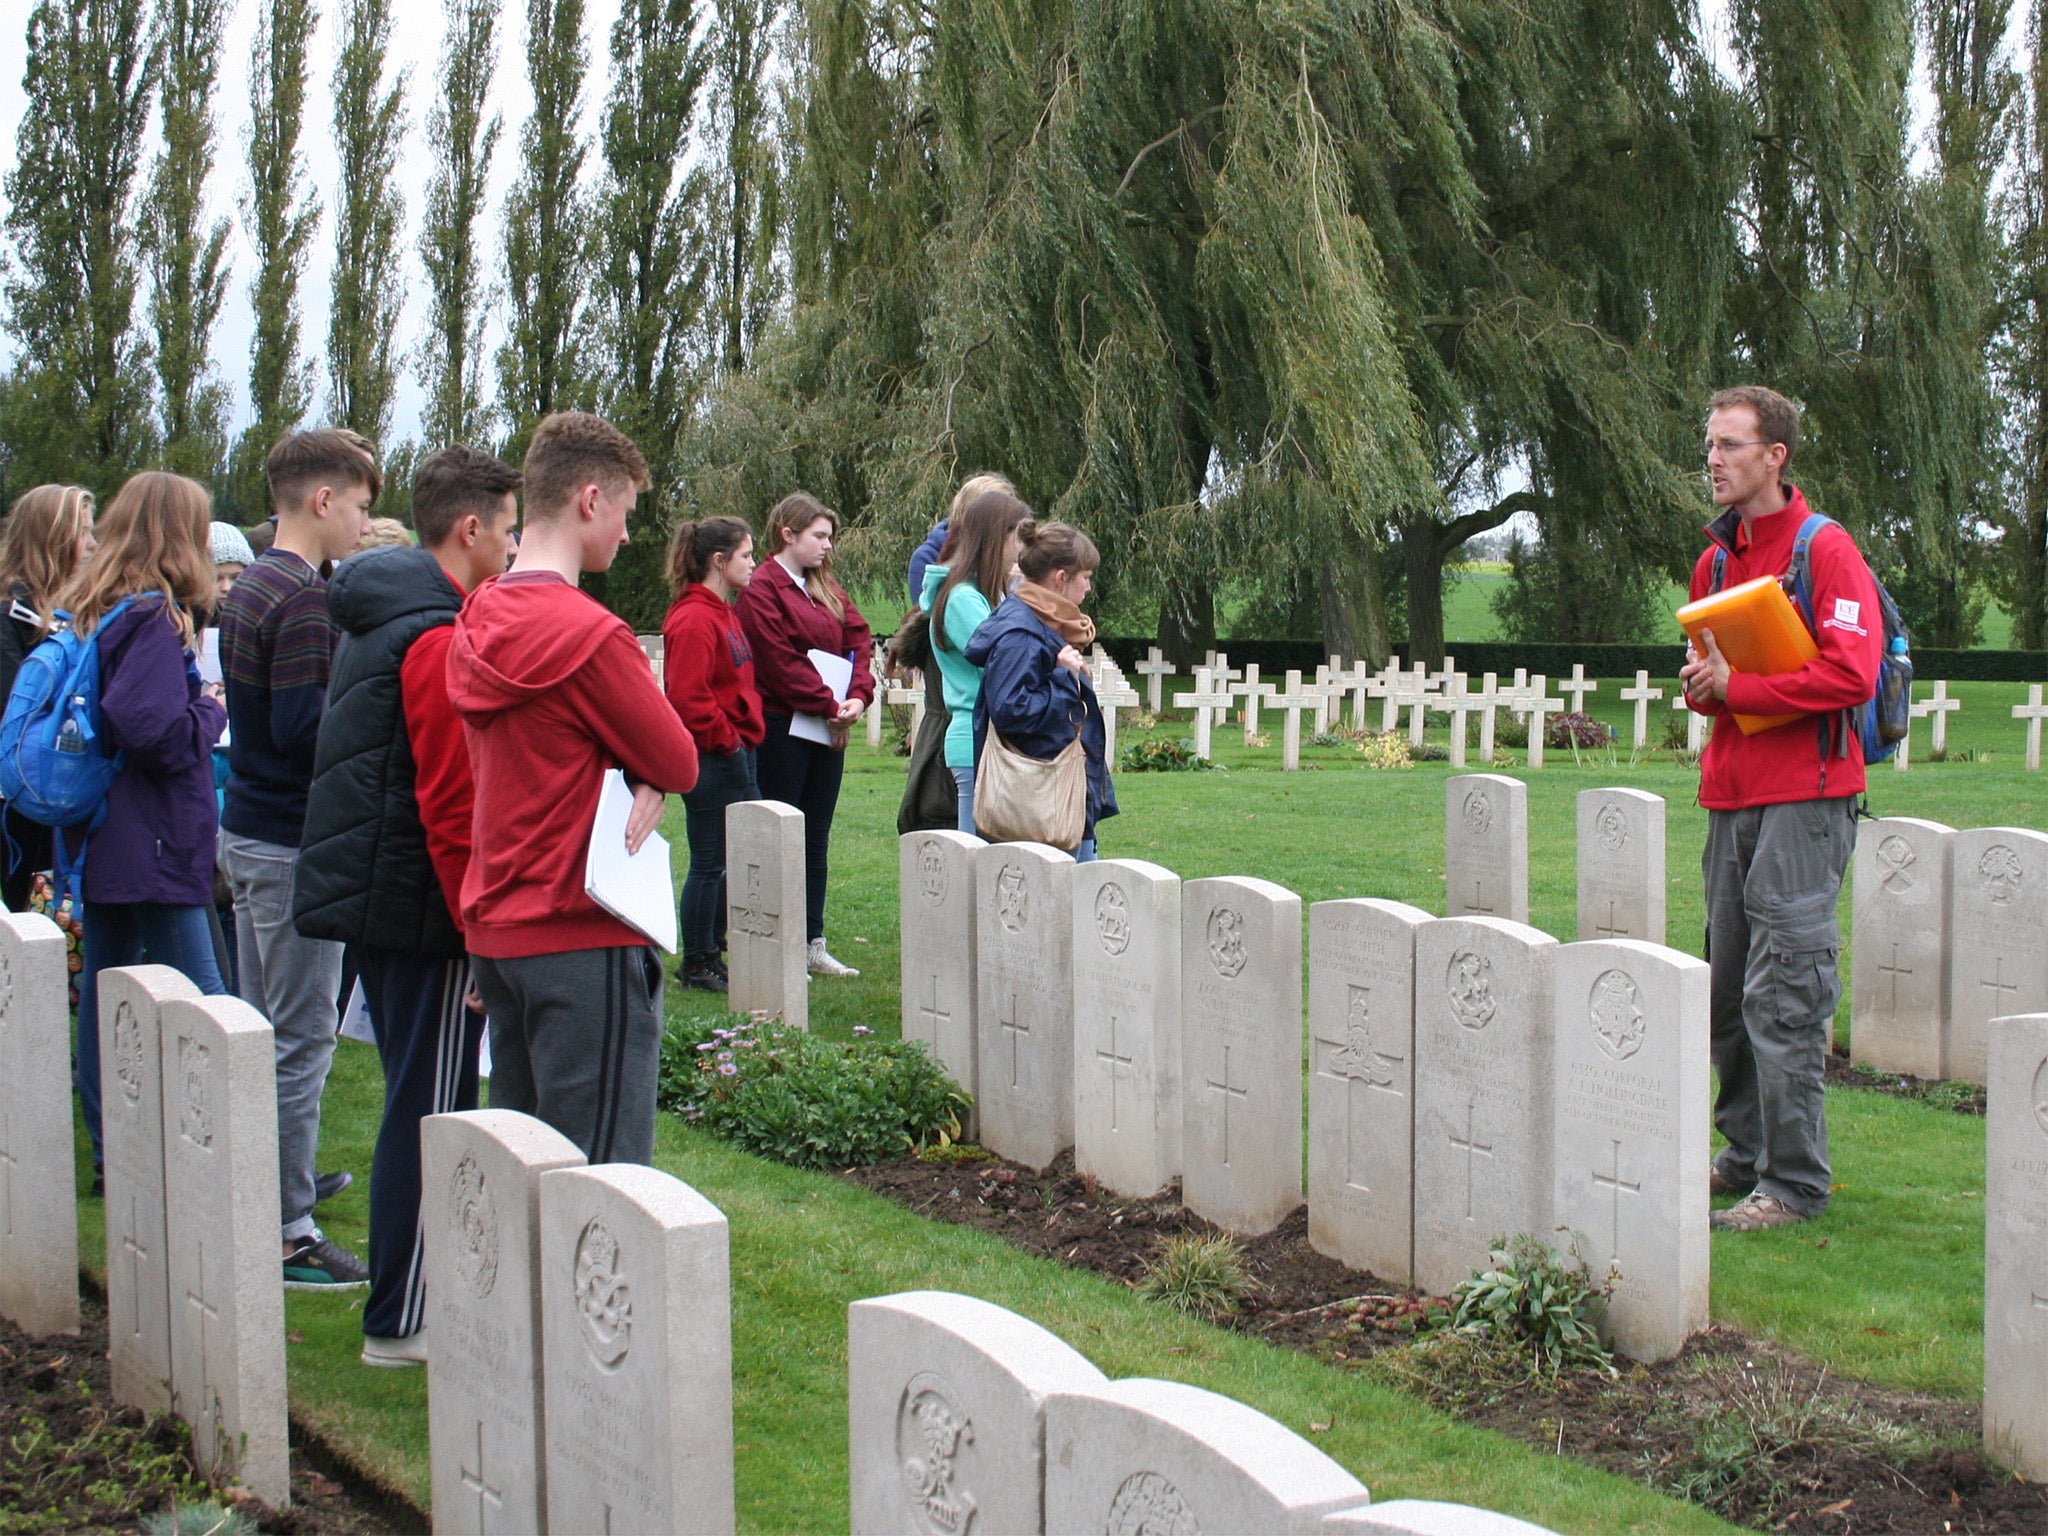 In memoriam: a school group visits Lijssenthoek Cemetery in Belgium, where there are nearly 11,000 war graves